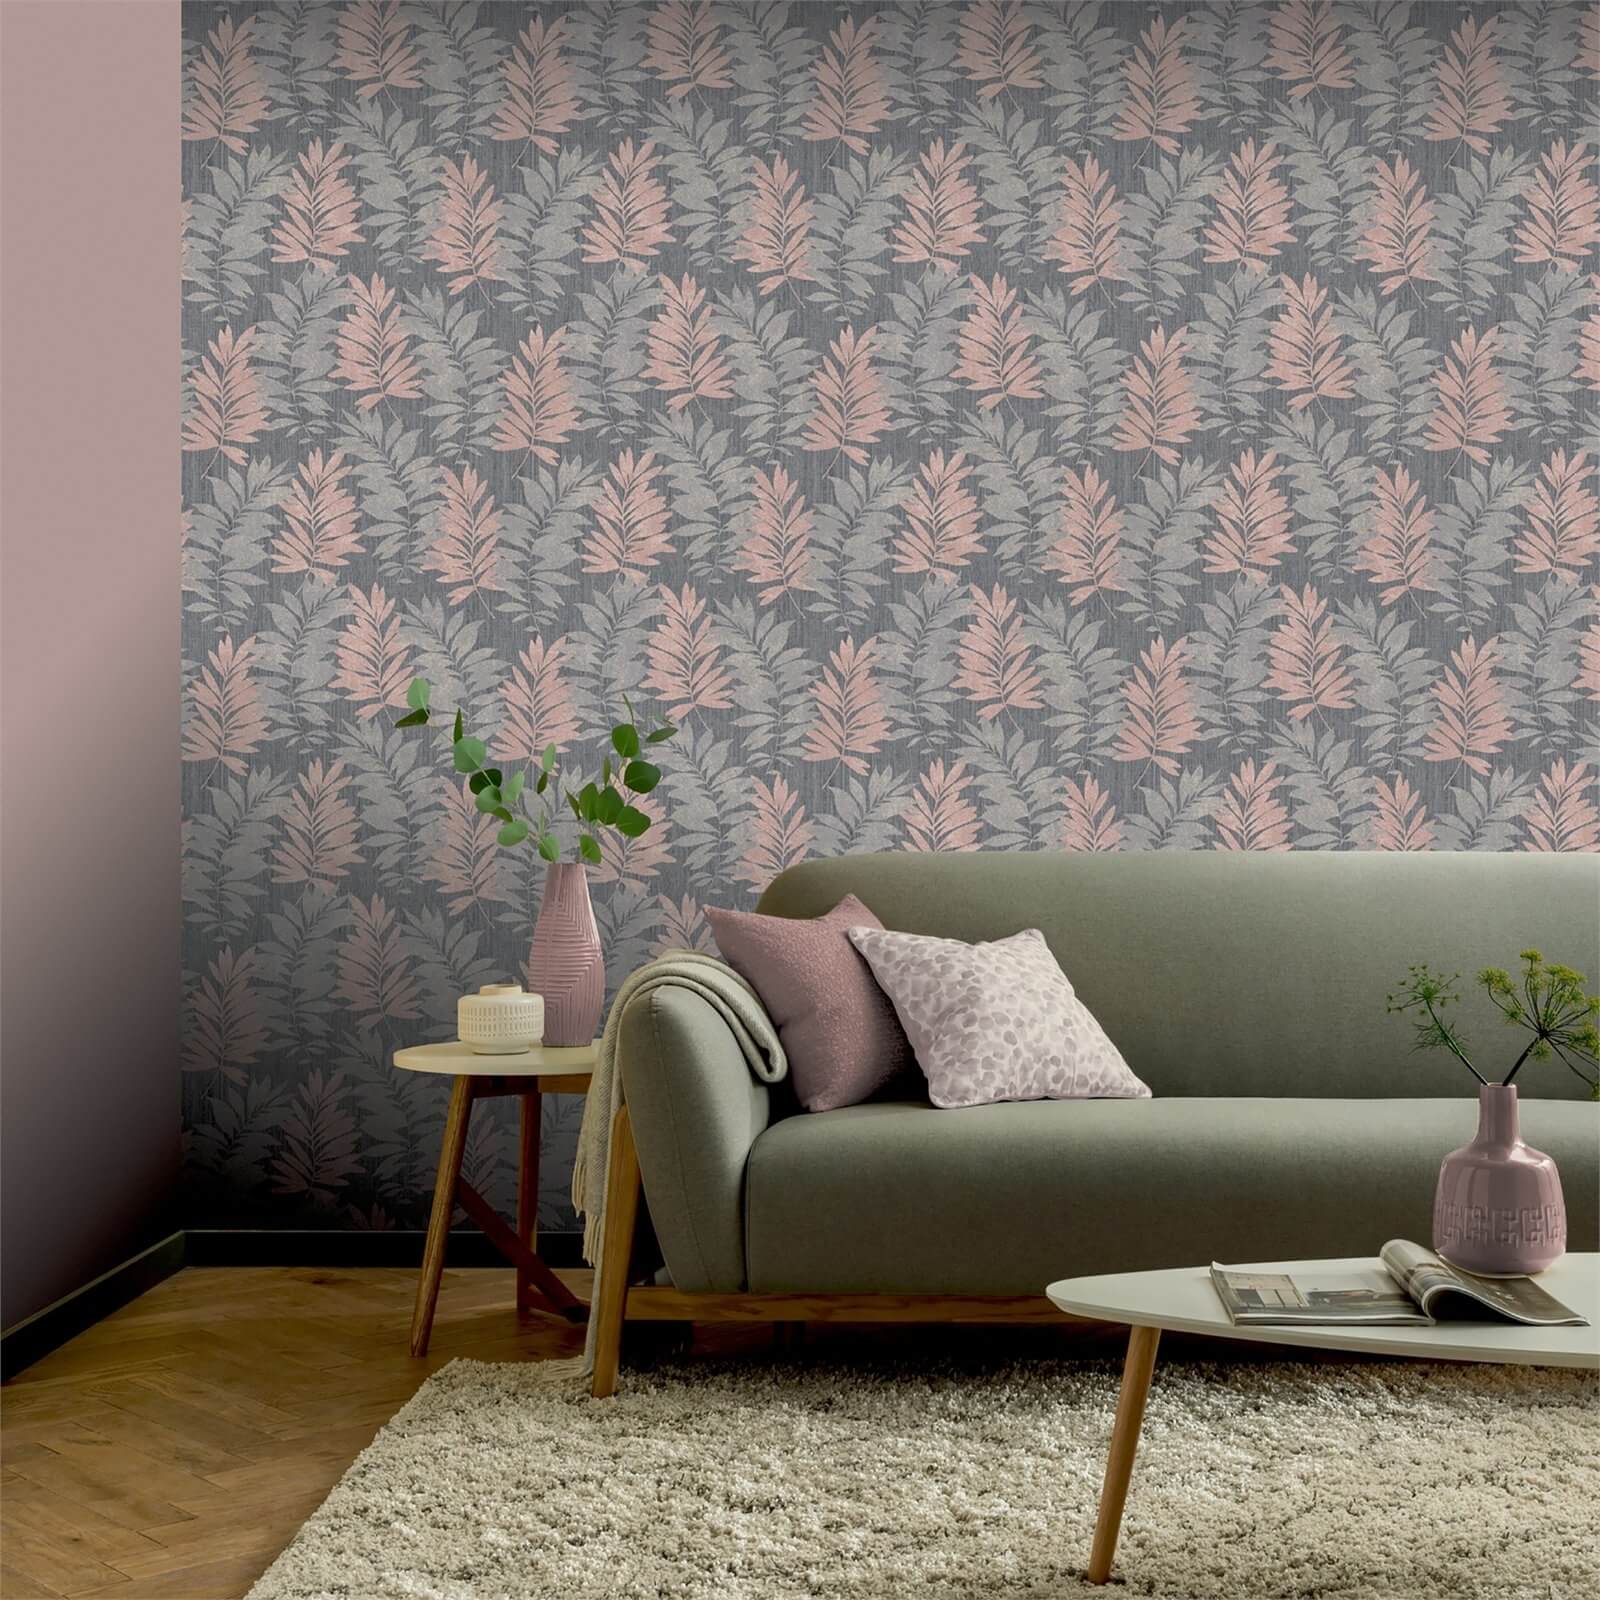 Arthouse Stardust Palm Leaf Textured Glitter Pink and Grey Wallpaper